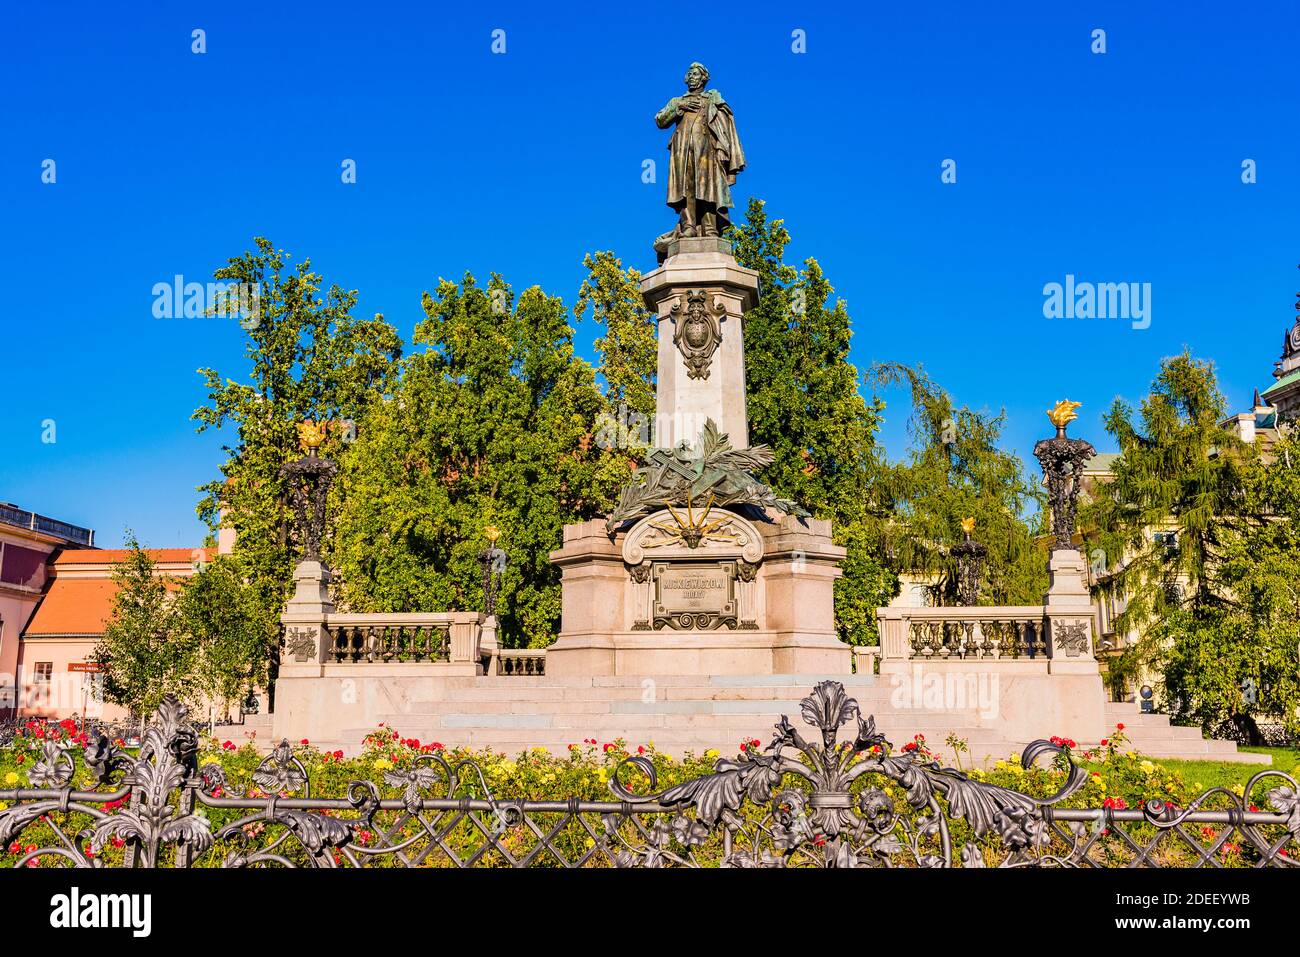 Adam Mickiewicz Monument is a monument dedicated to Adam Mickiewicz, polish poet. The Neo-Classicist monument was constructed in 1897–1898 by sculptor Stock Photo